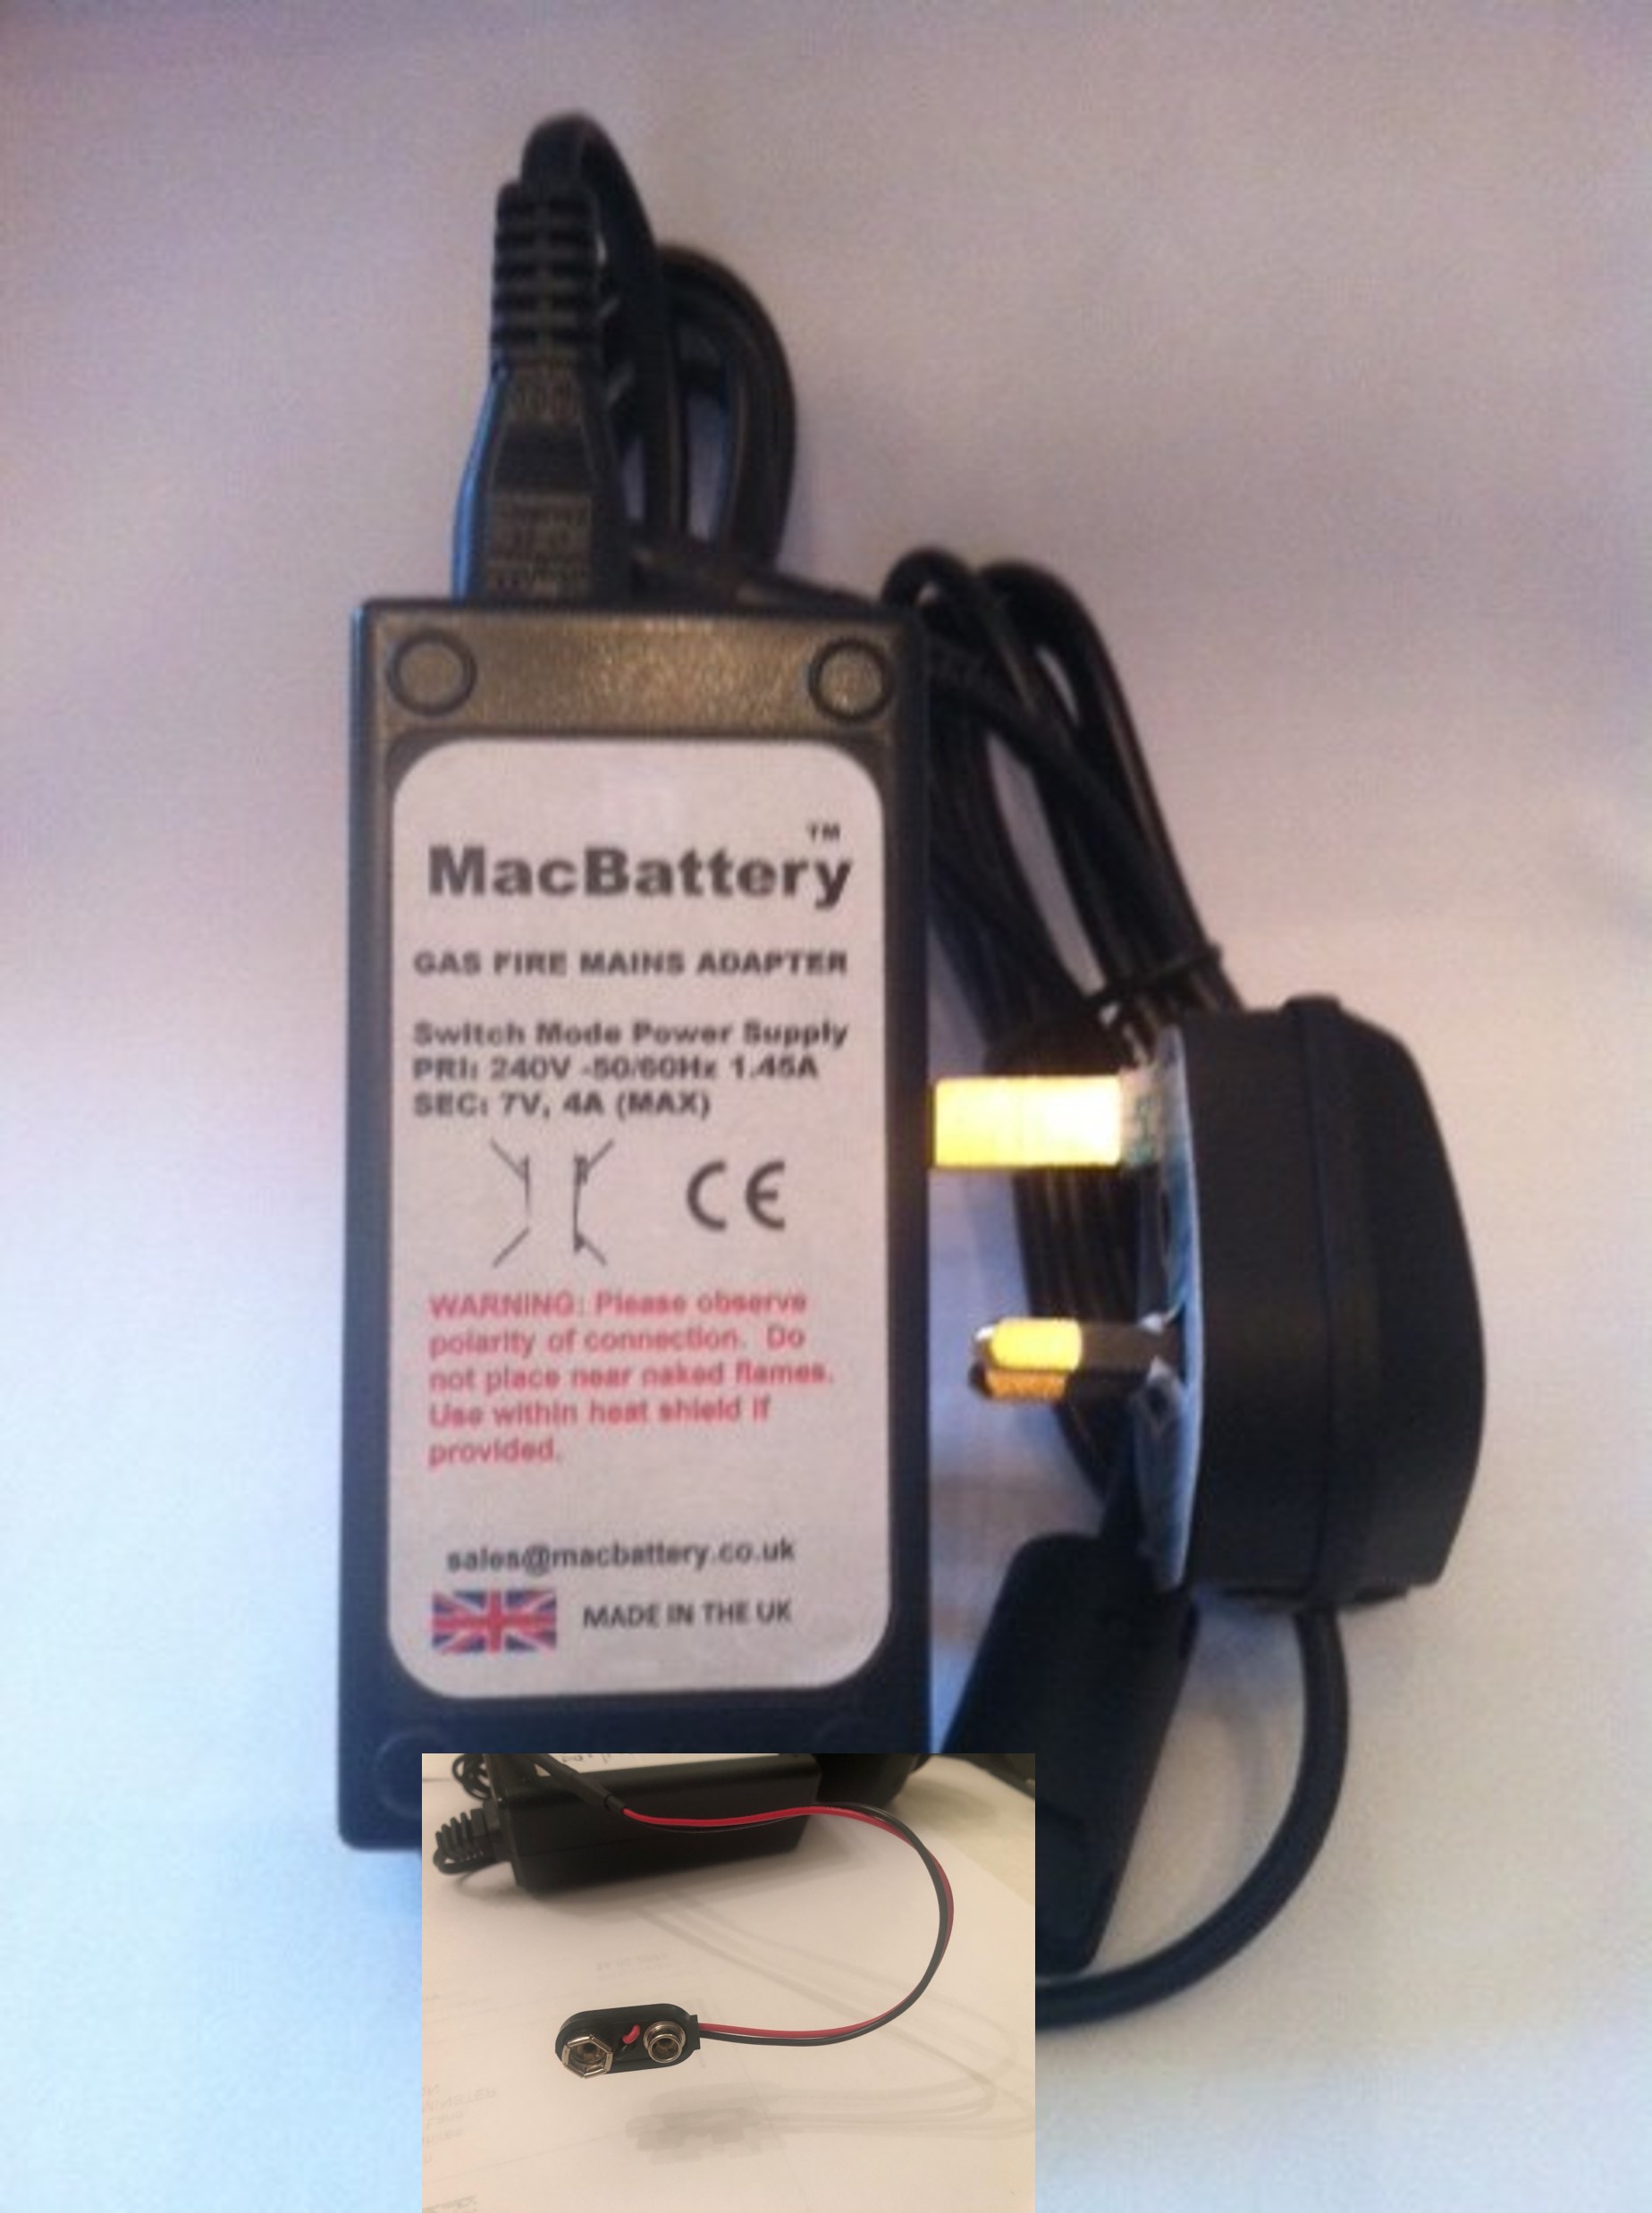 Mains Gas Fire Battery for PP3